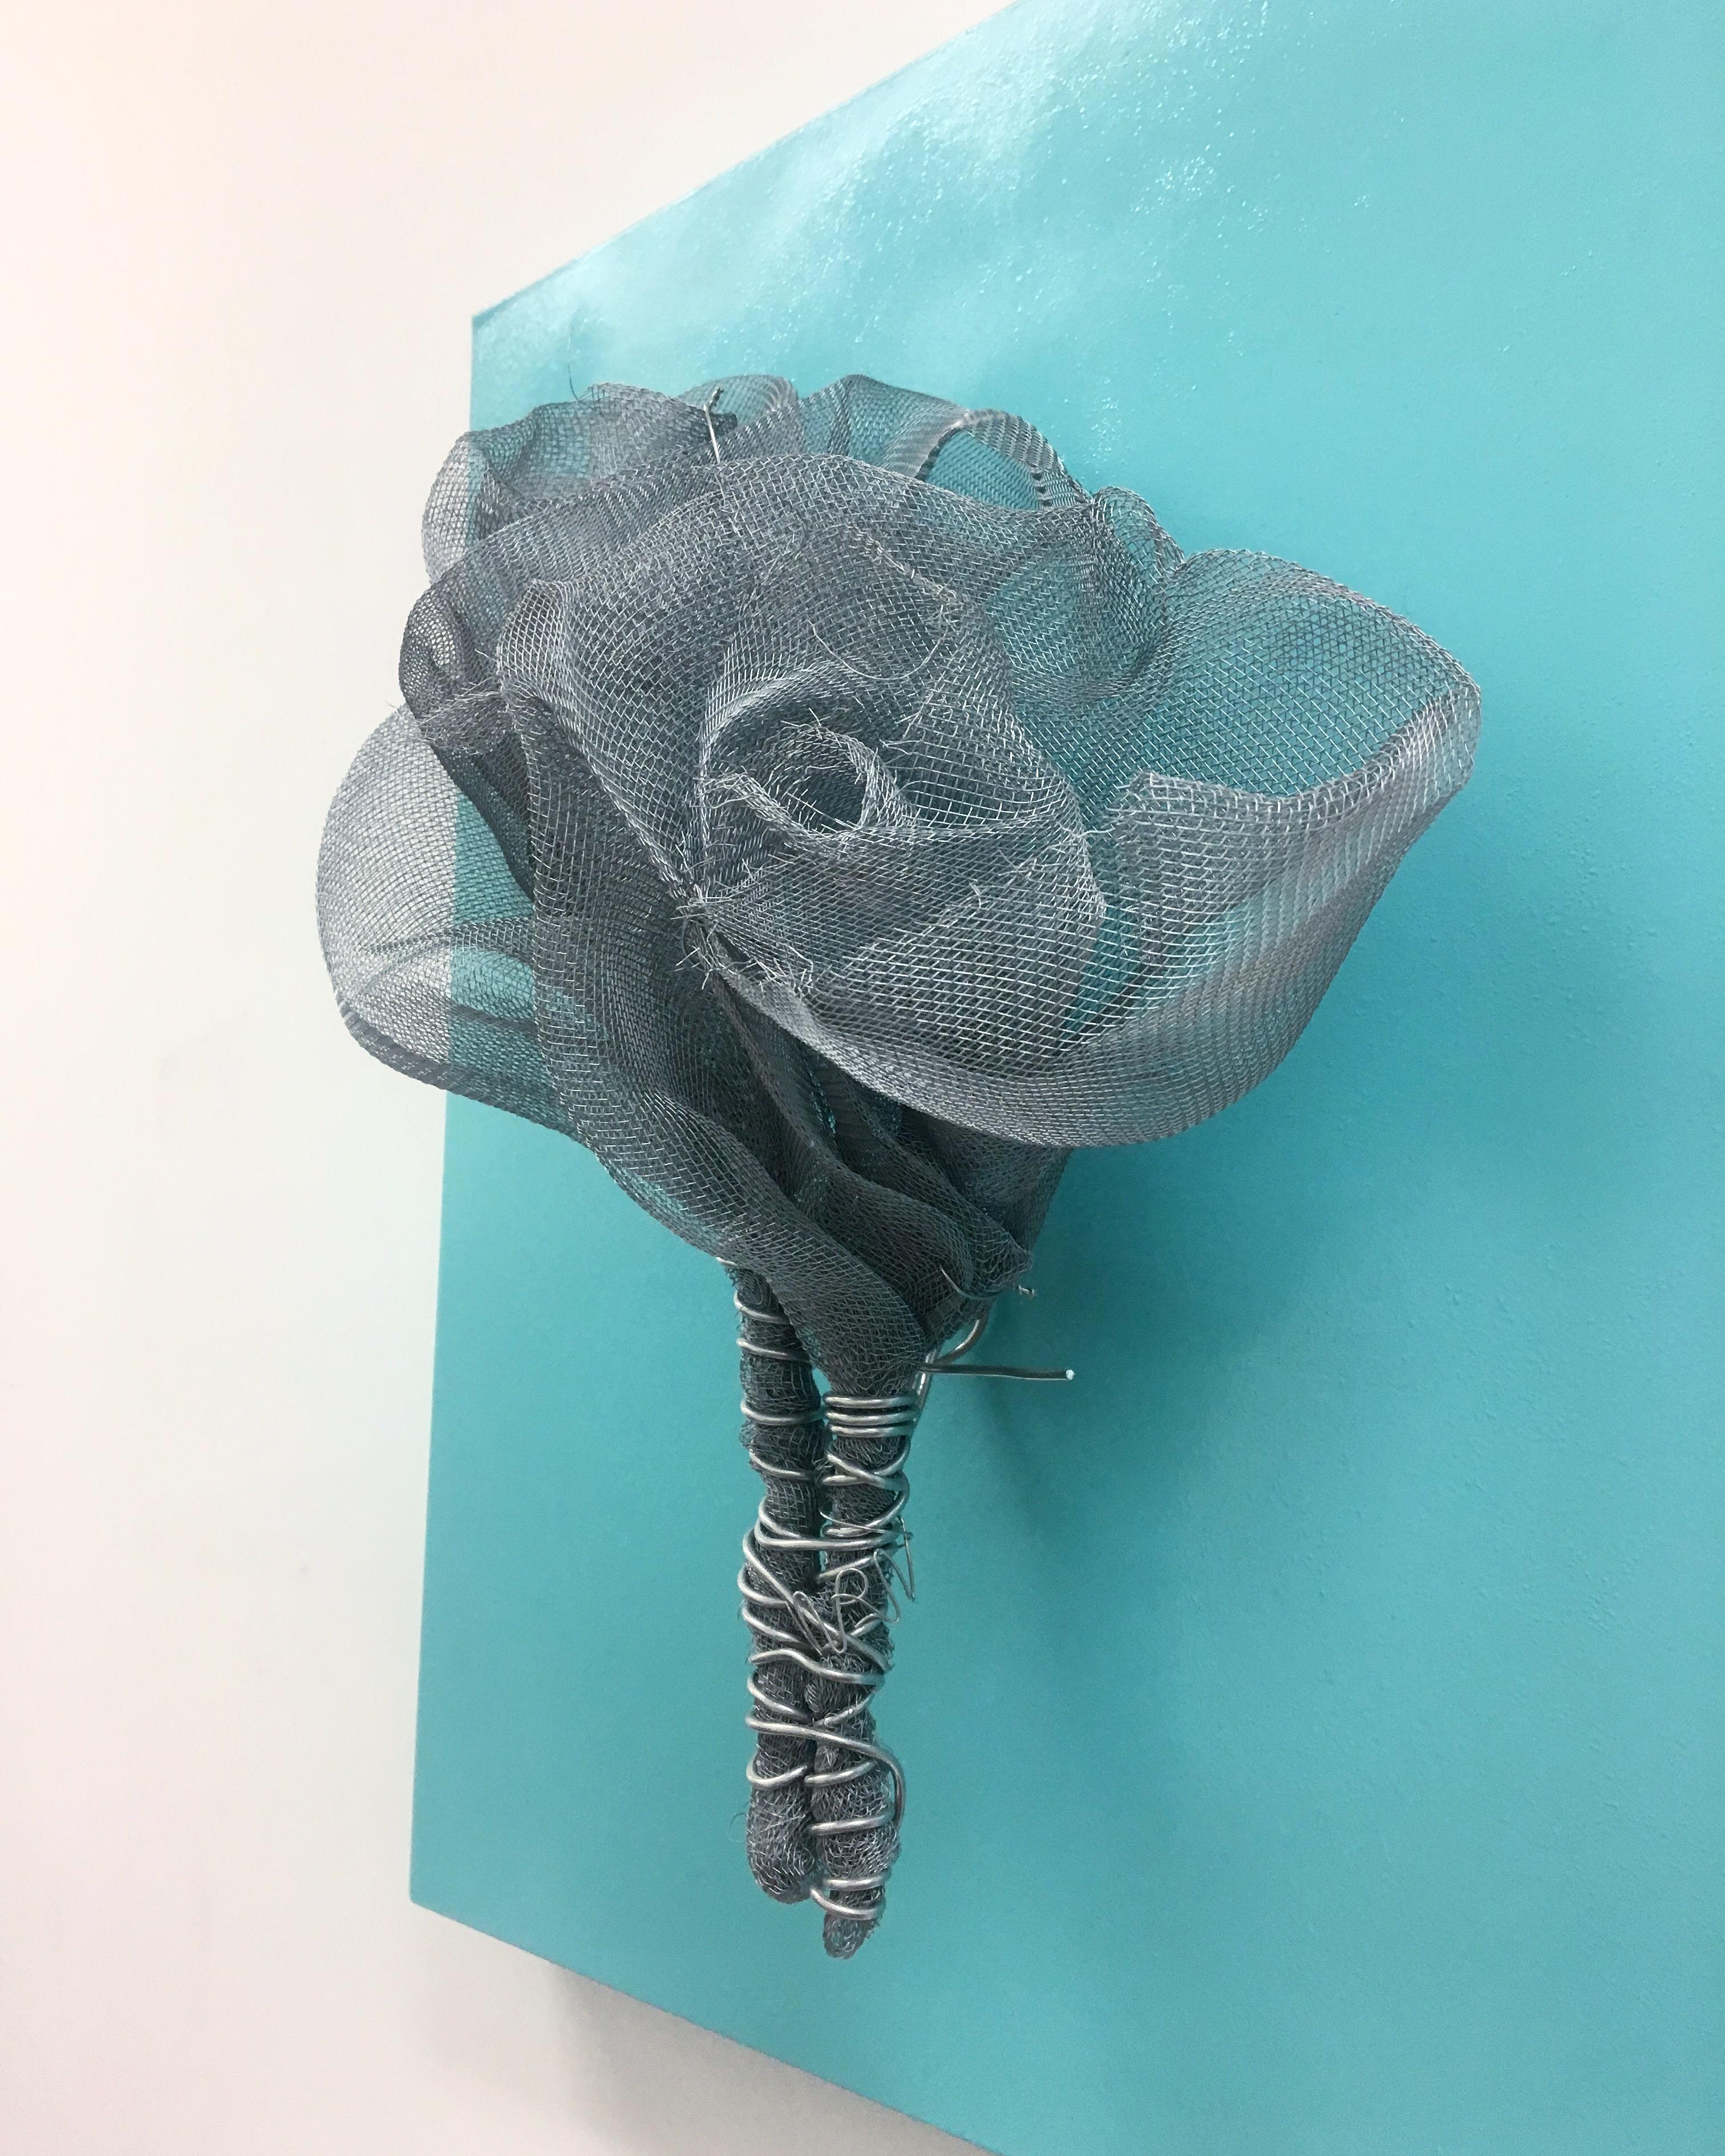 ROSES DELICIOUS sculpture by Melanie Newcombe 5